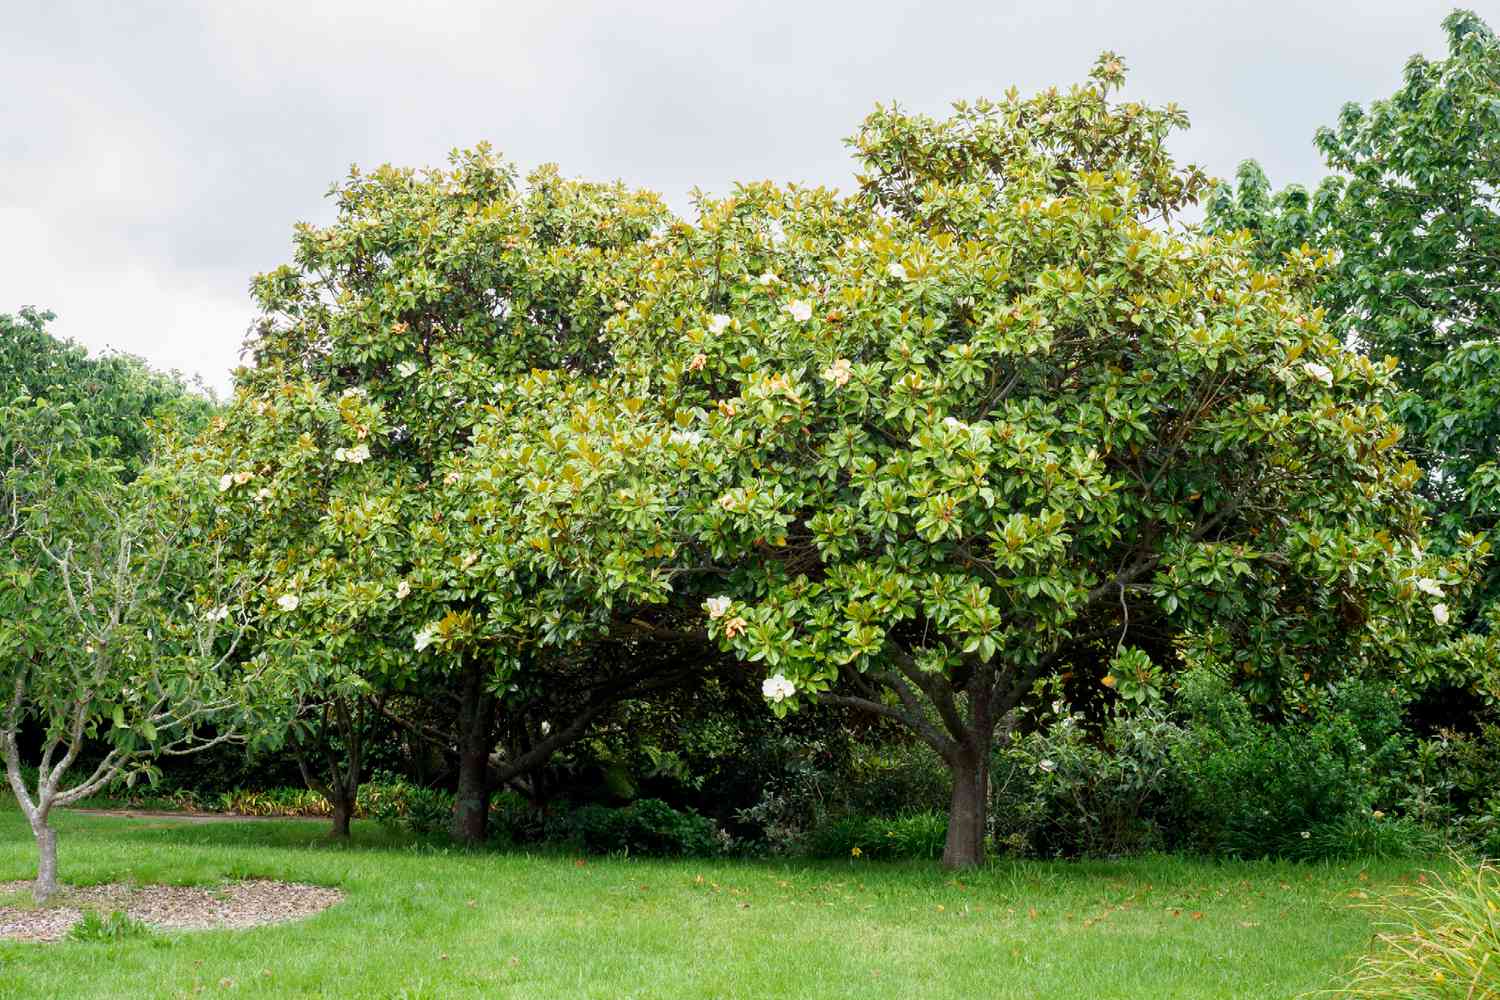 Southern Magnolia trees on edge of trimmed lawn